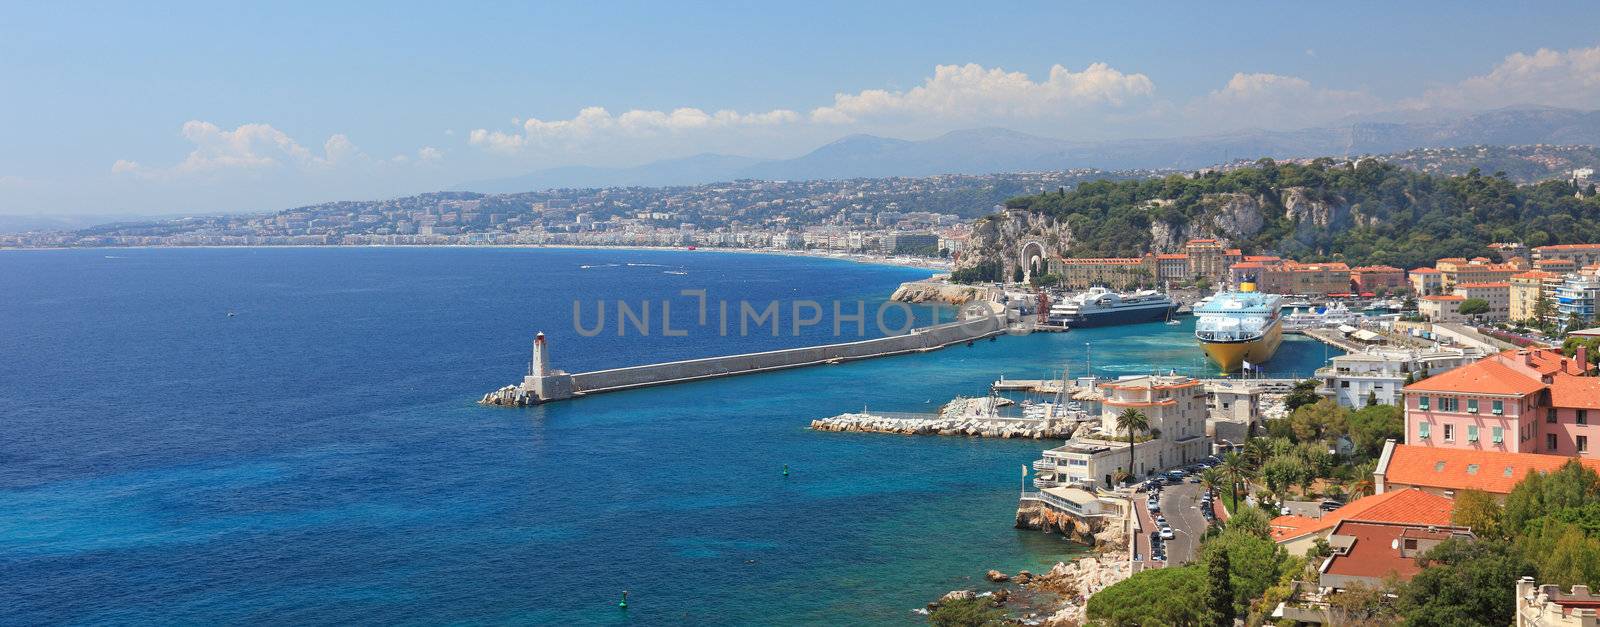 Panoramic view of the city of Nice, France.